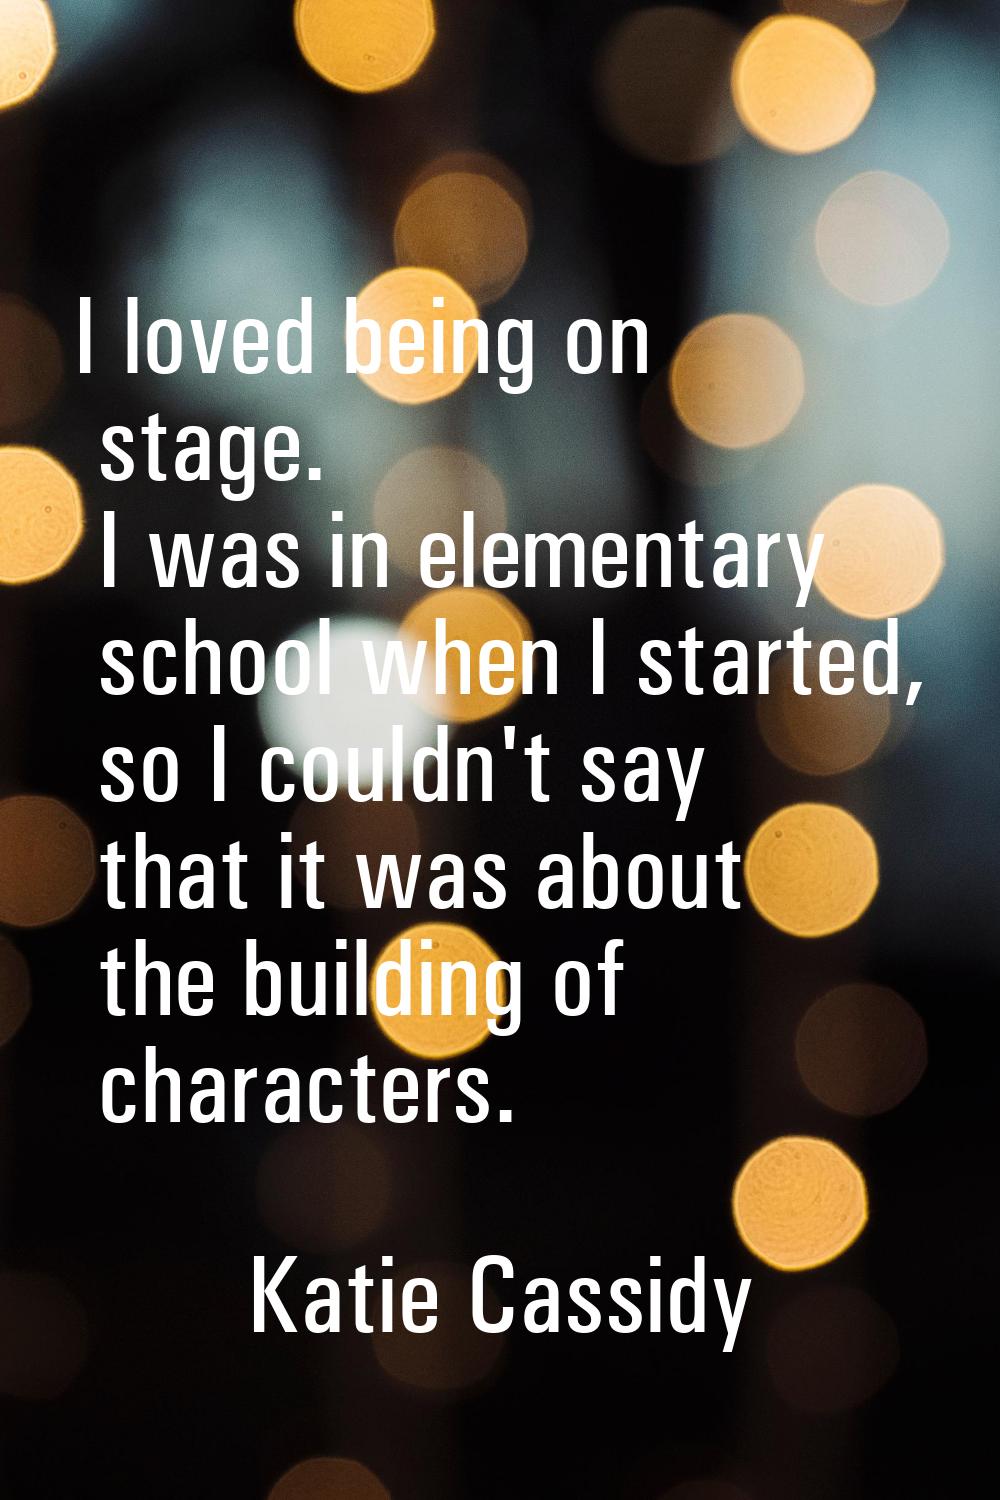 I loved being on stage. I was in elementary school when I started, so I couldn't say that it was ab